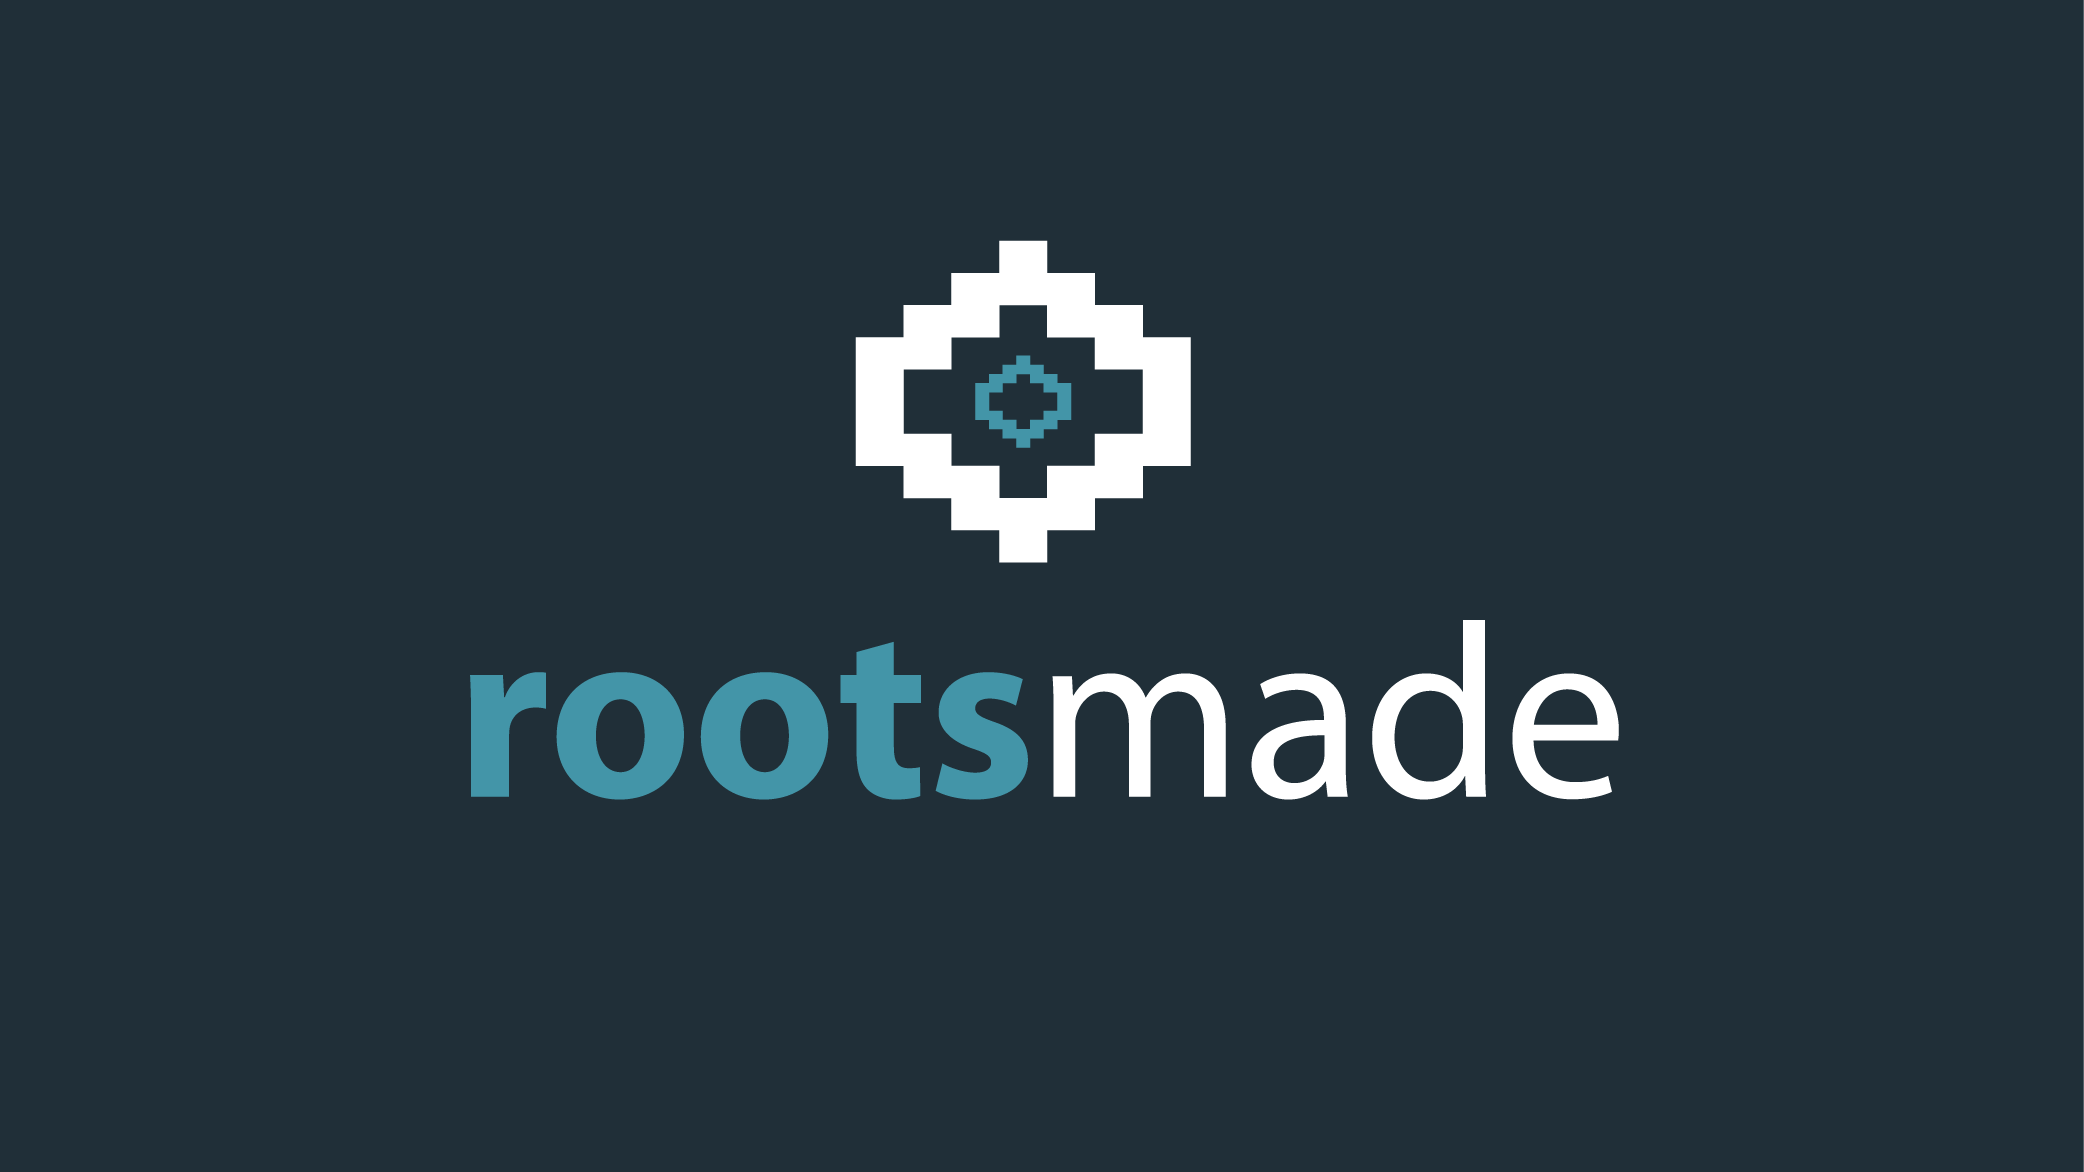 roots-made-01